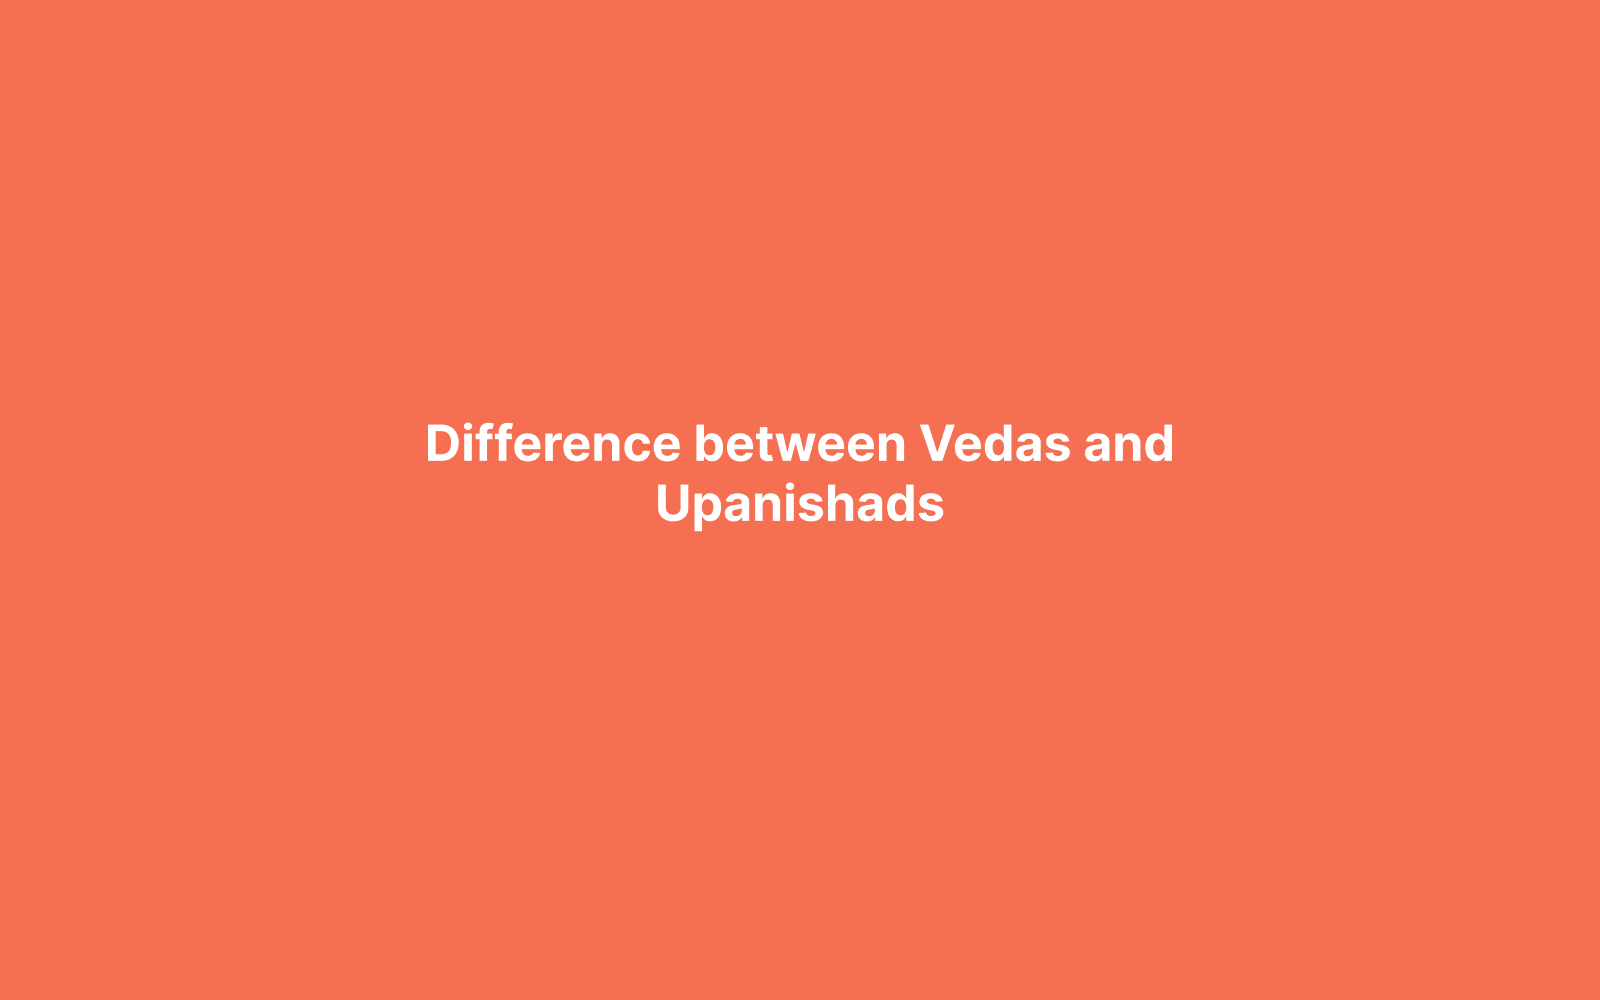 what were the vedas and upanishads